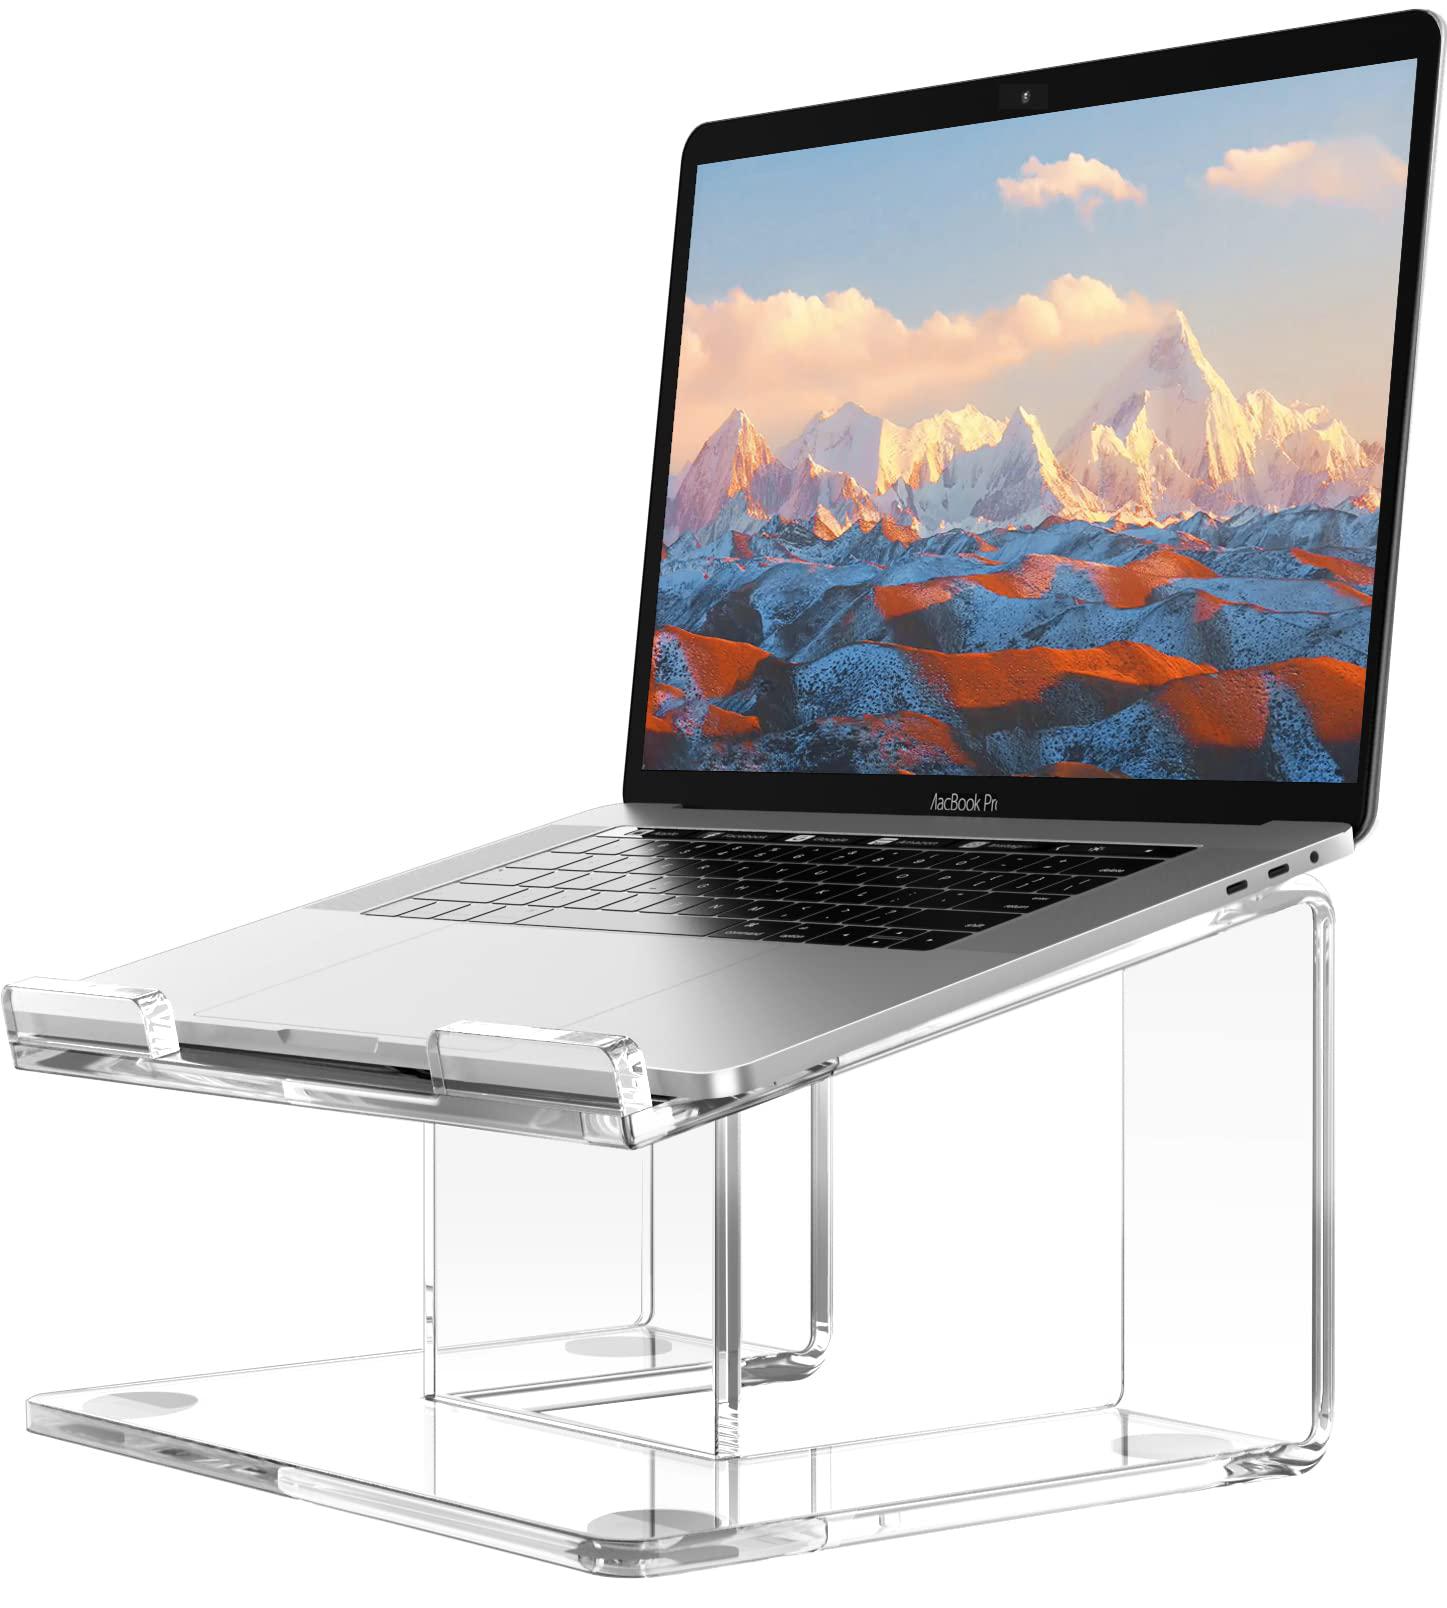 fucdtefc acrylic laptop stand for desk, laptop riser tray for 10-15.6 inch laptops, ergonomic laptop holder, computer stand f